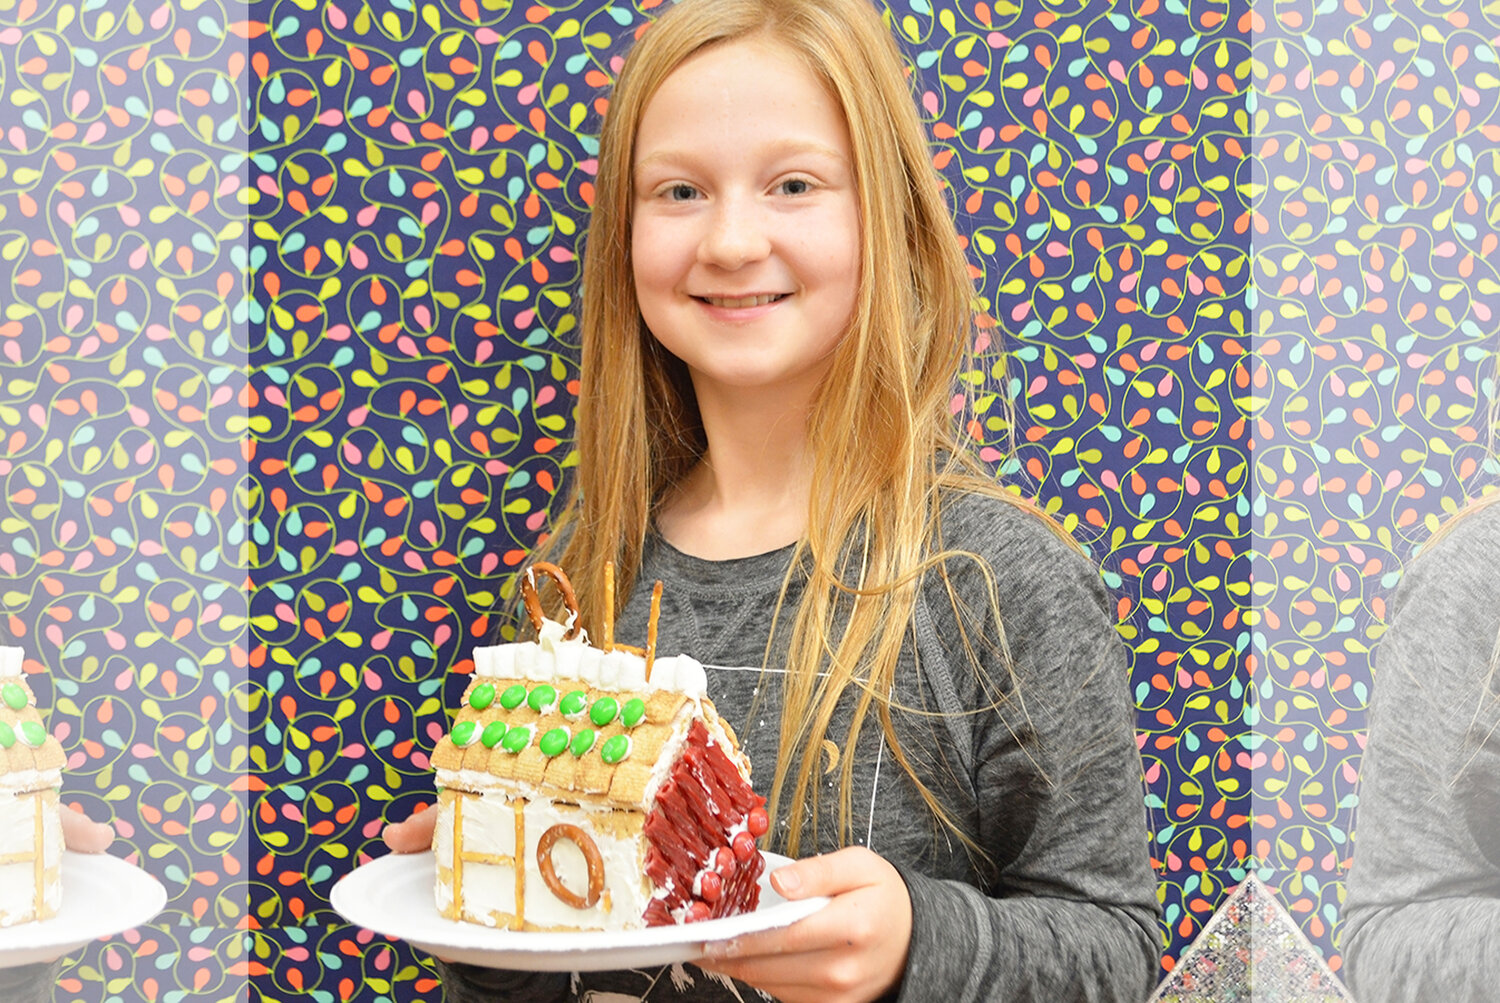 Gingerbread House Decorating contest at Artists’ Exchange